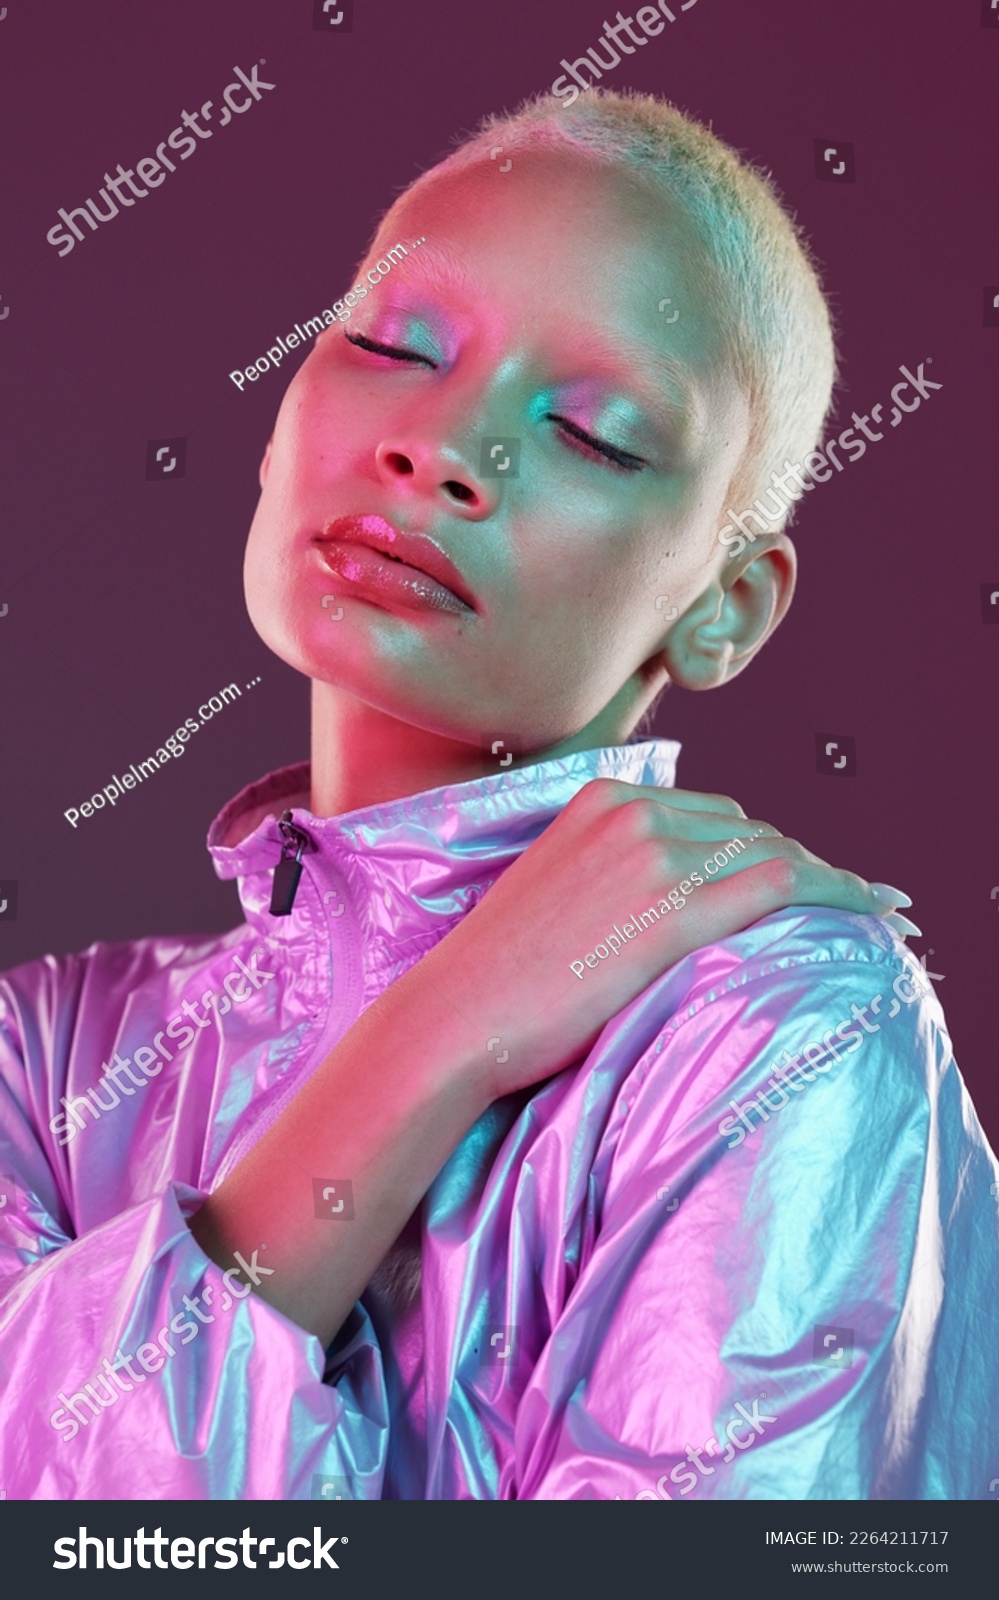 Holographic fashion, woman face and makeup glow for hologram trend isolated in studio. Futuristic, vaporwave and art color jacket on cyberpunk aesthetic model person for retro cosmetics shine on skin #2264211717